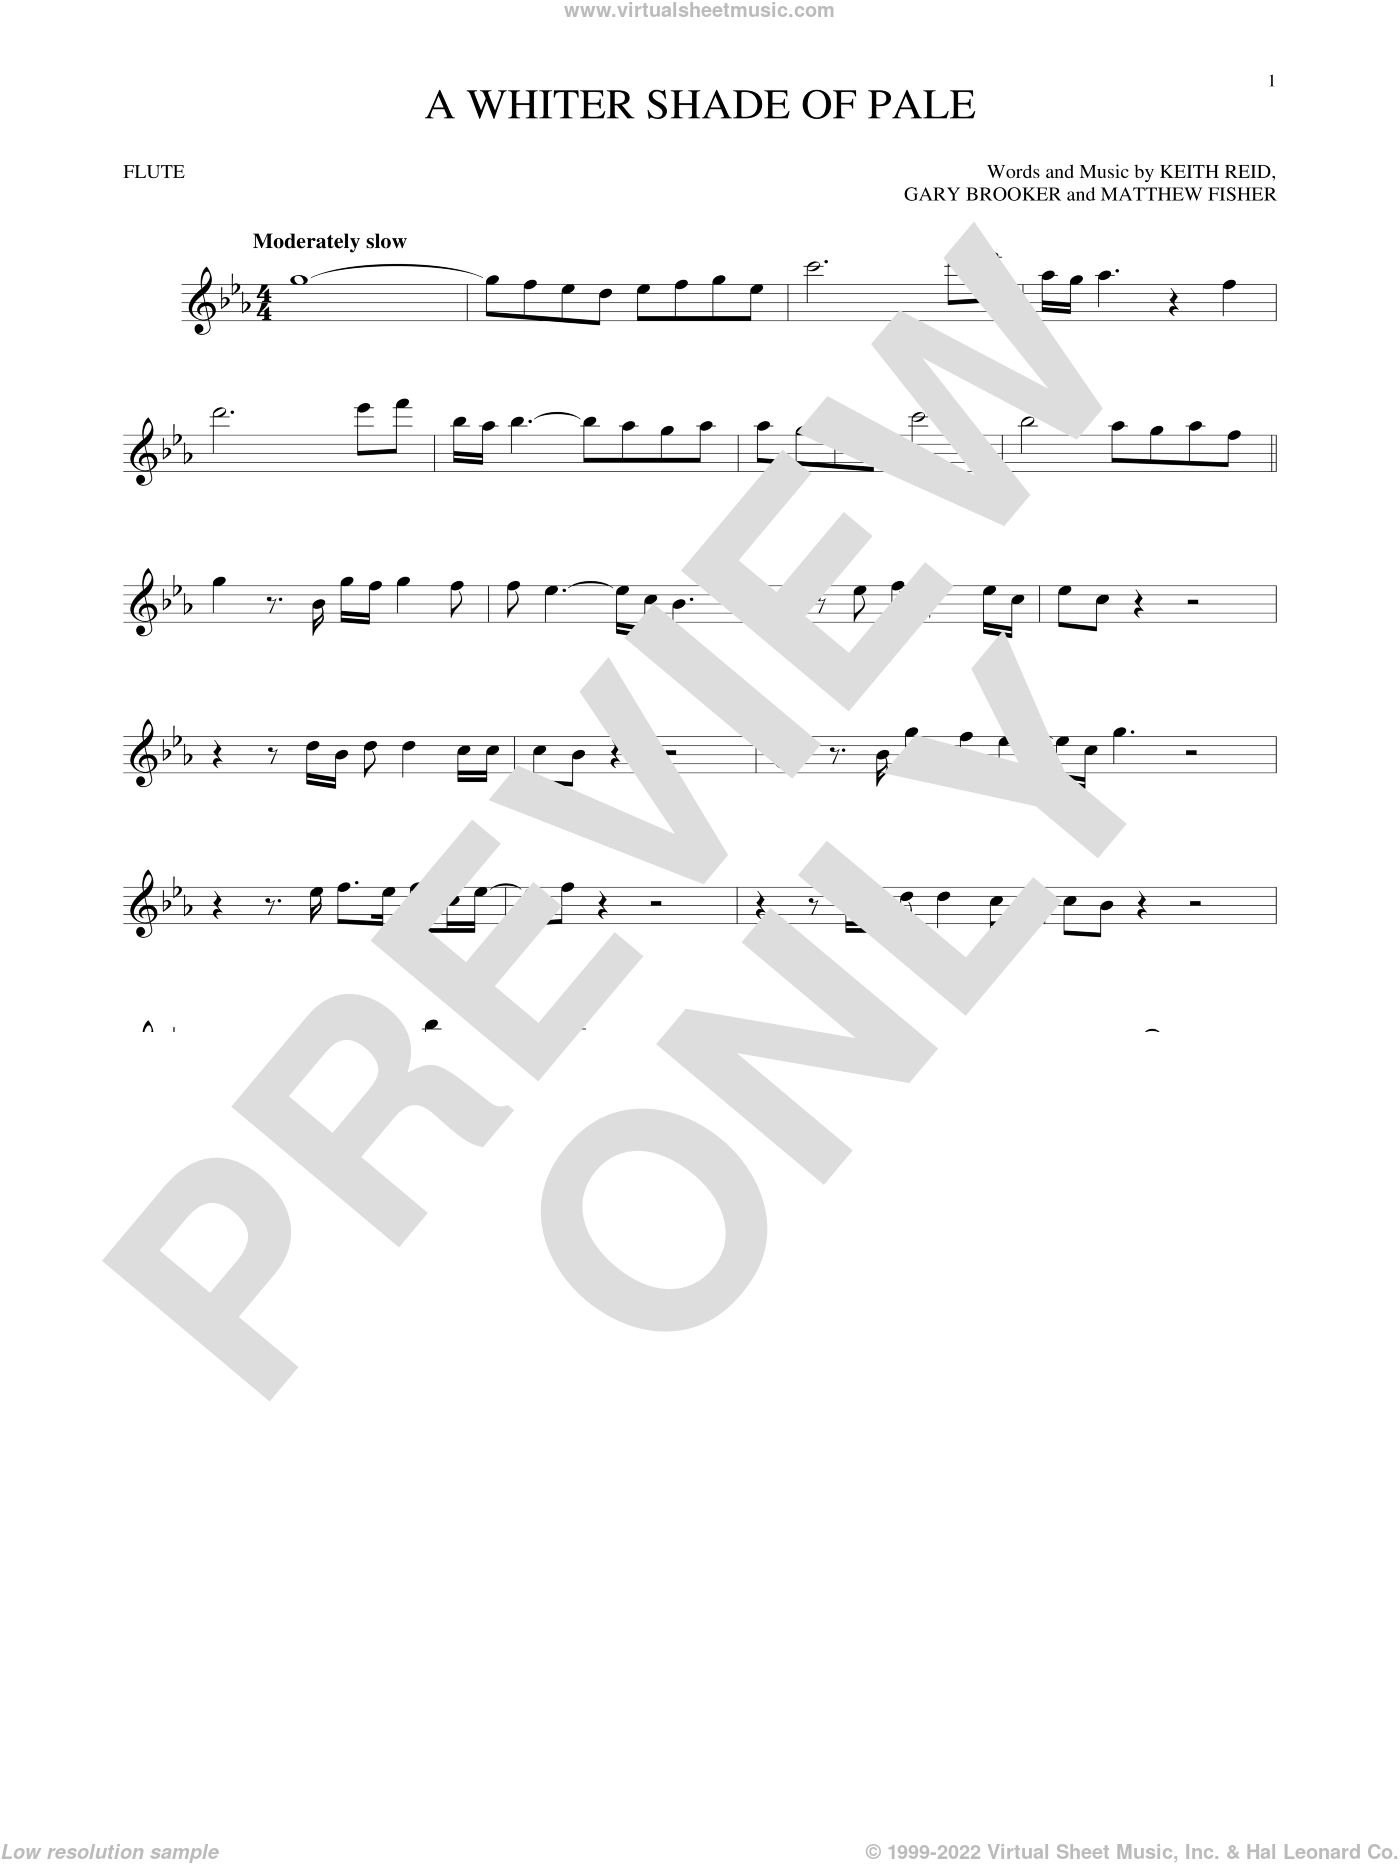 Harum A Whiter Shade Of Pale Sheet Music For Flute Solo Pdf